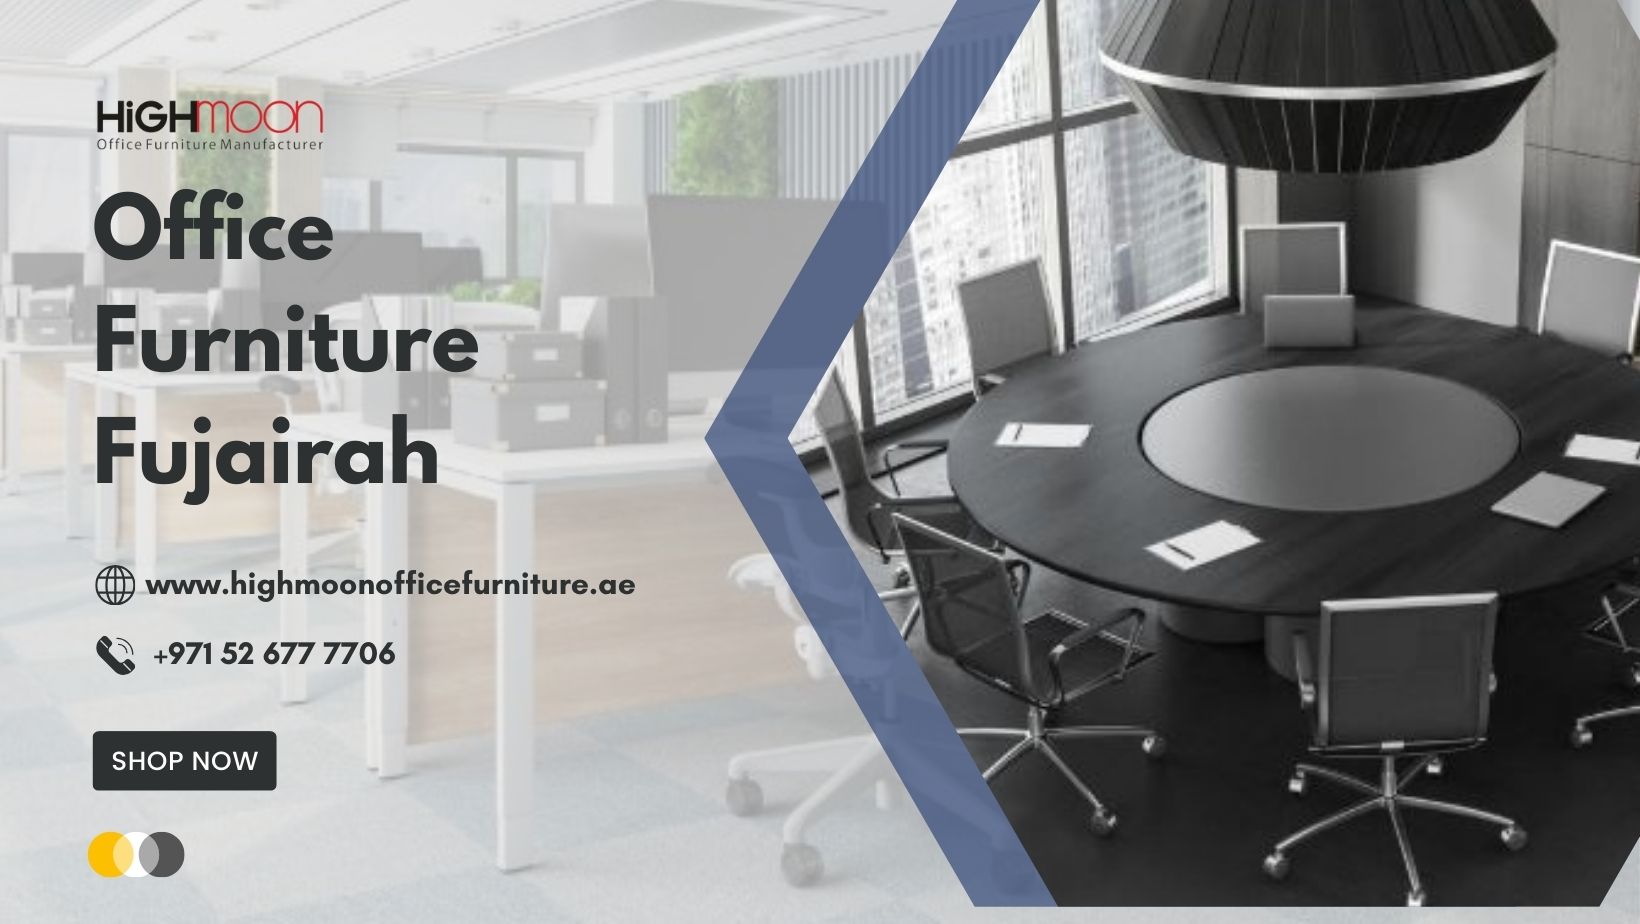 Planning for Office Furniture Fujairah